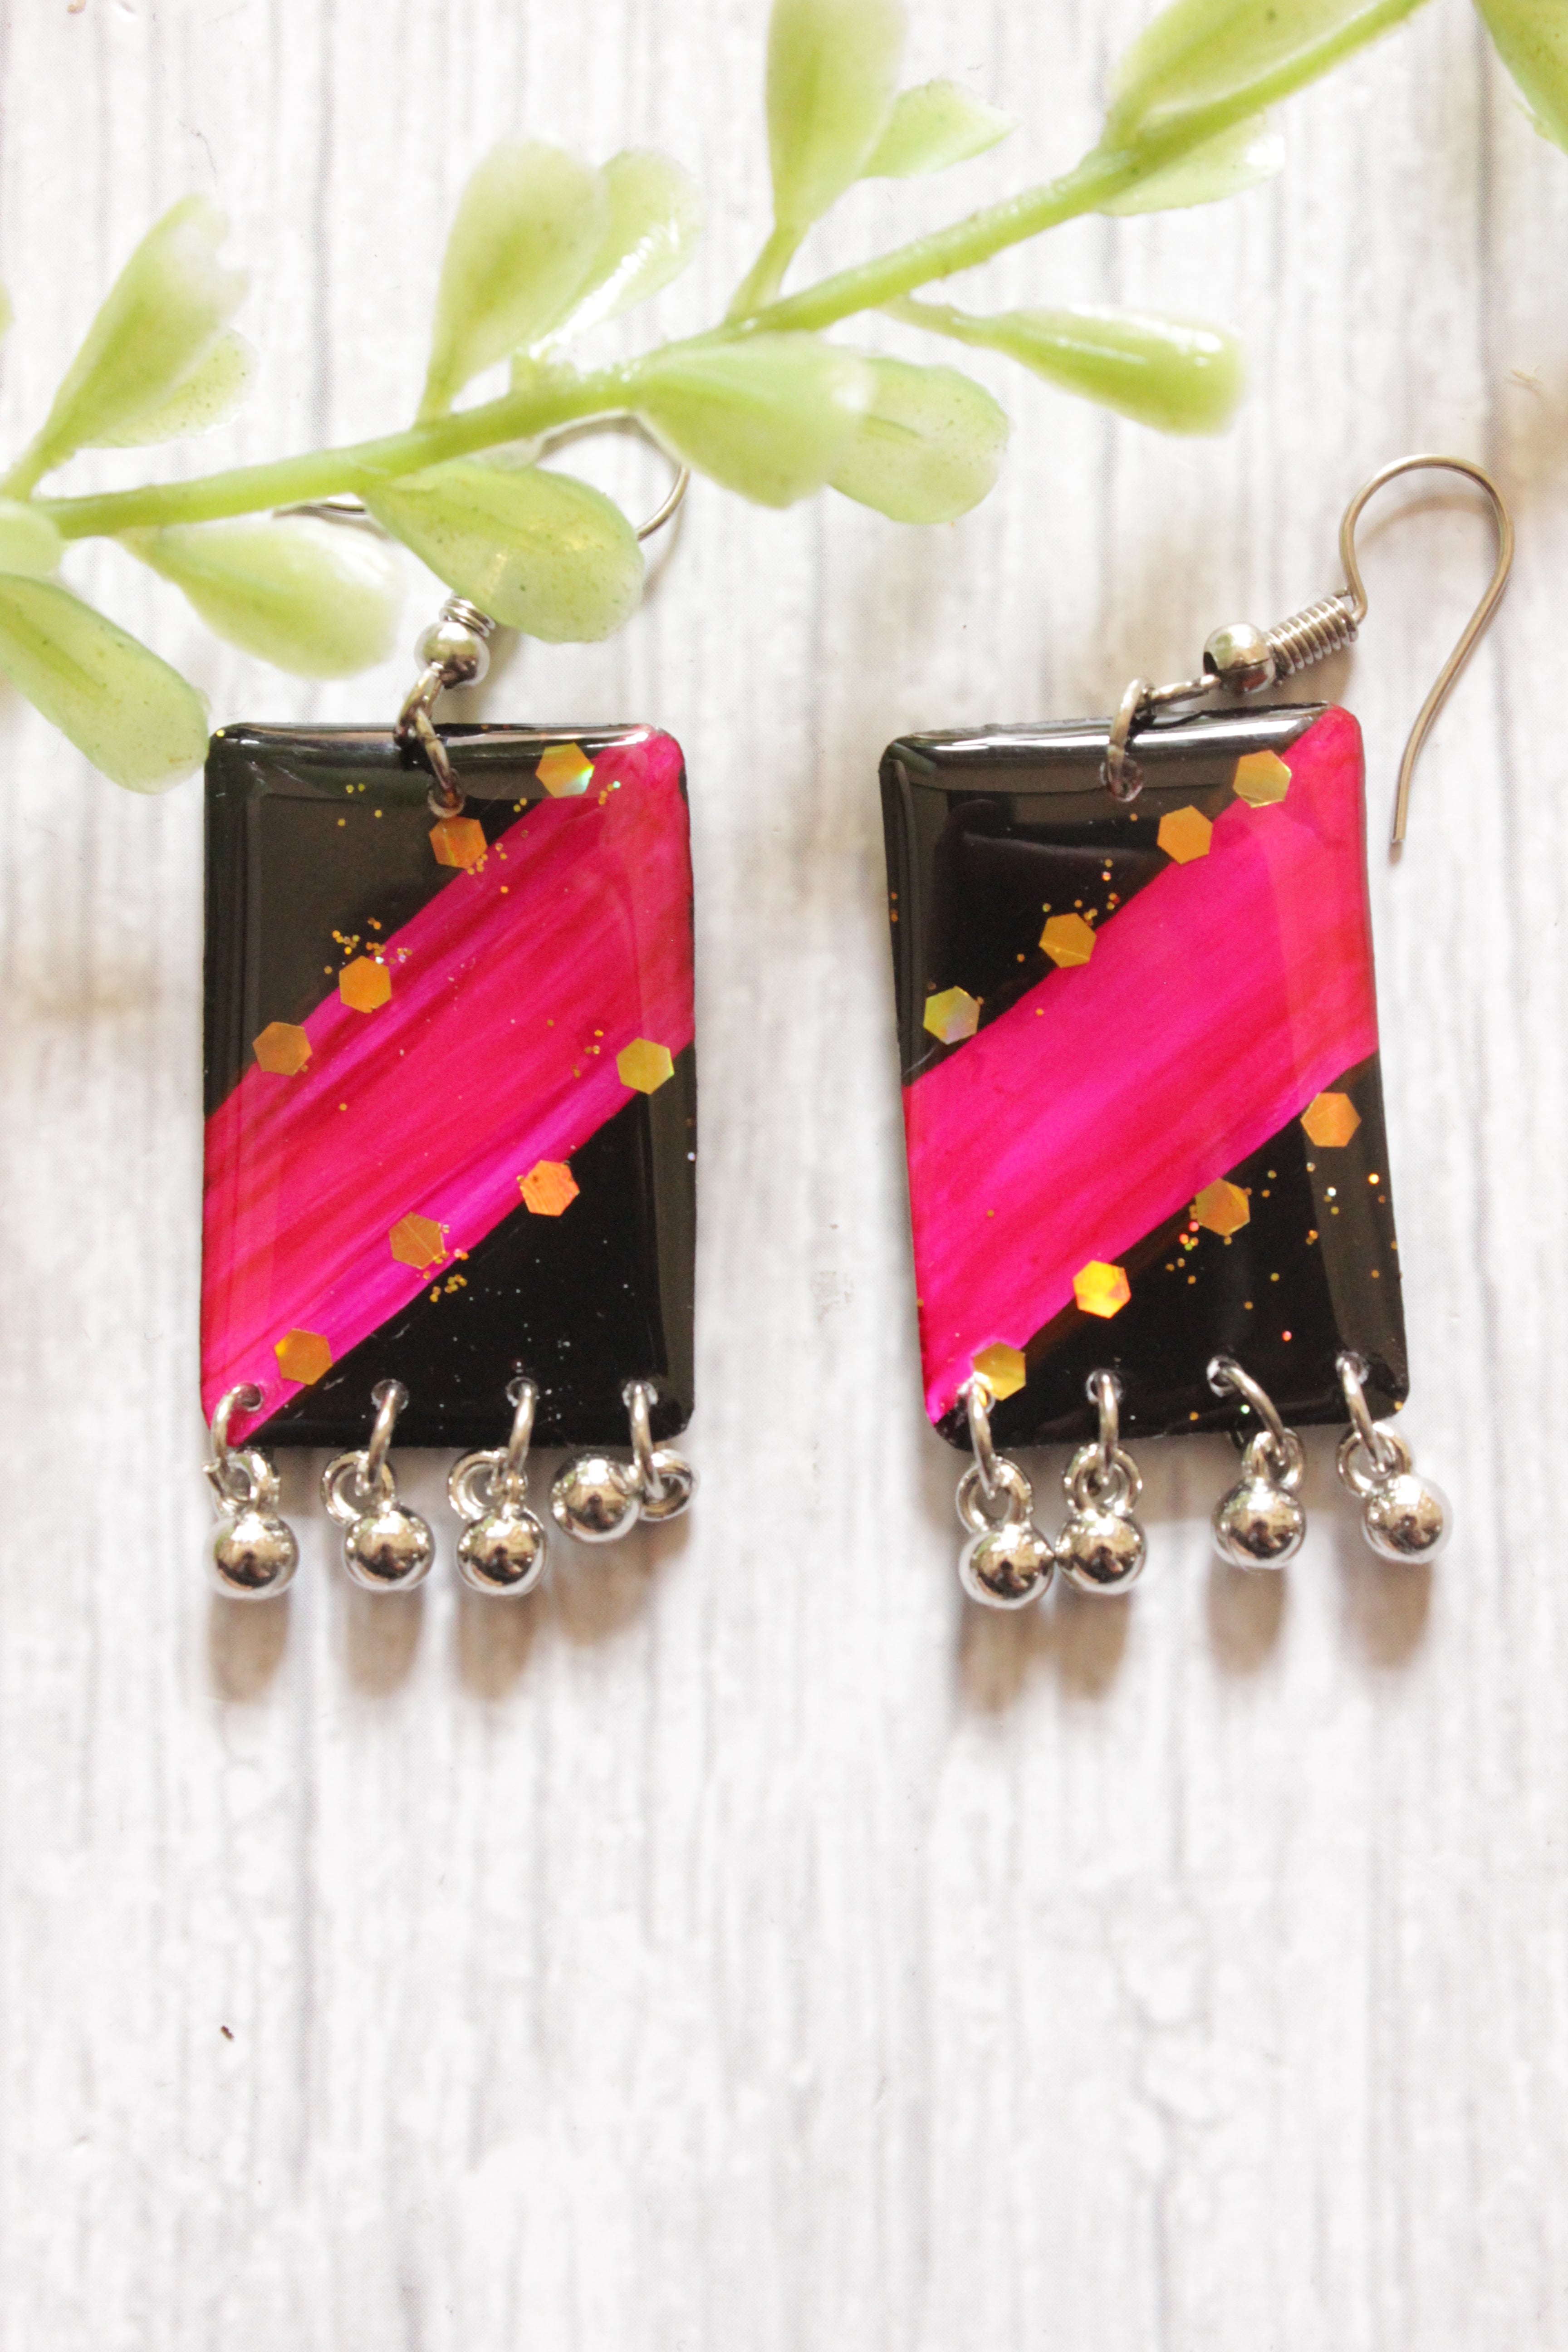 Black and Pink Hand Painted Shape Resin Earrings with Metal Ghungroo Accents